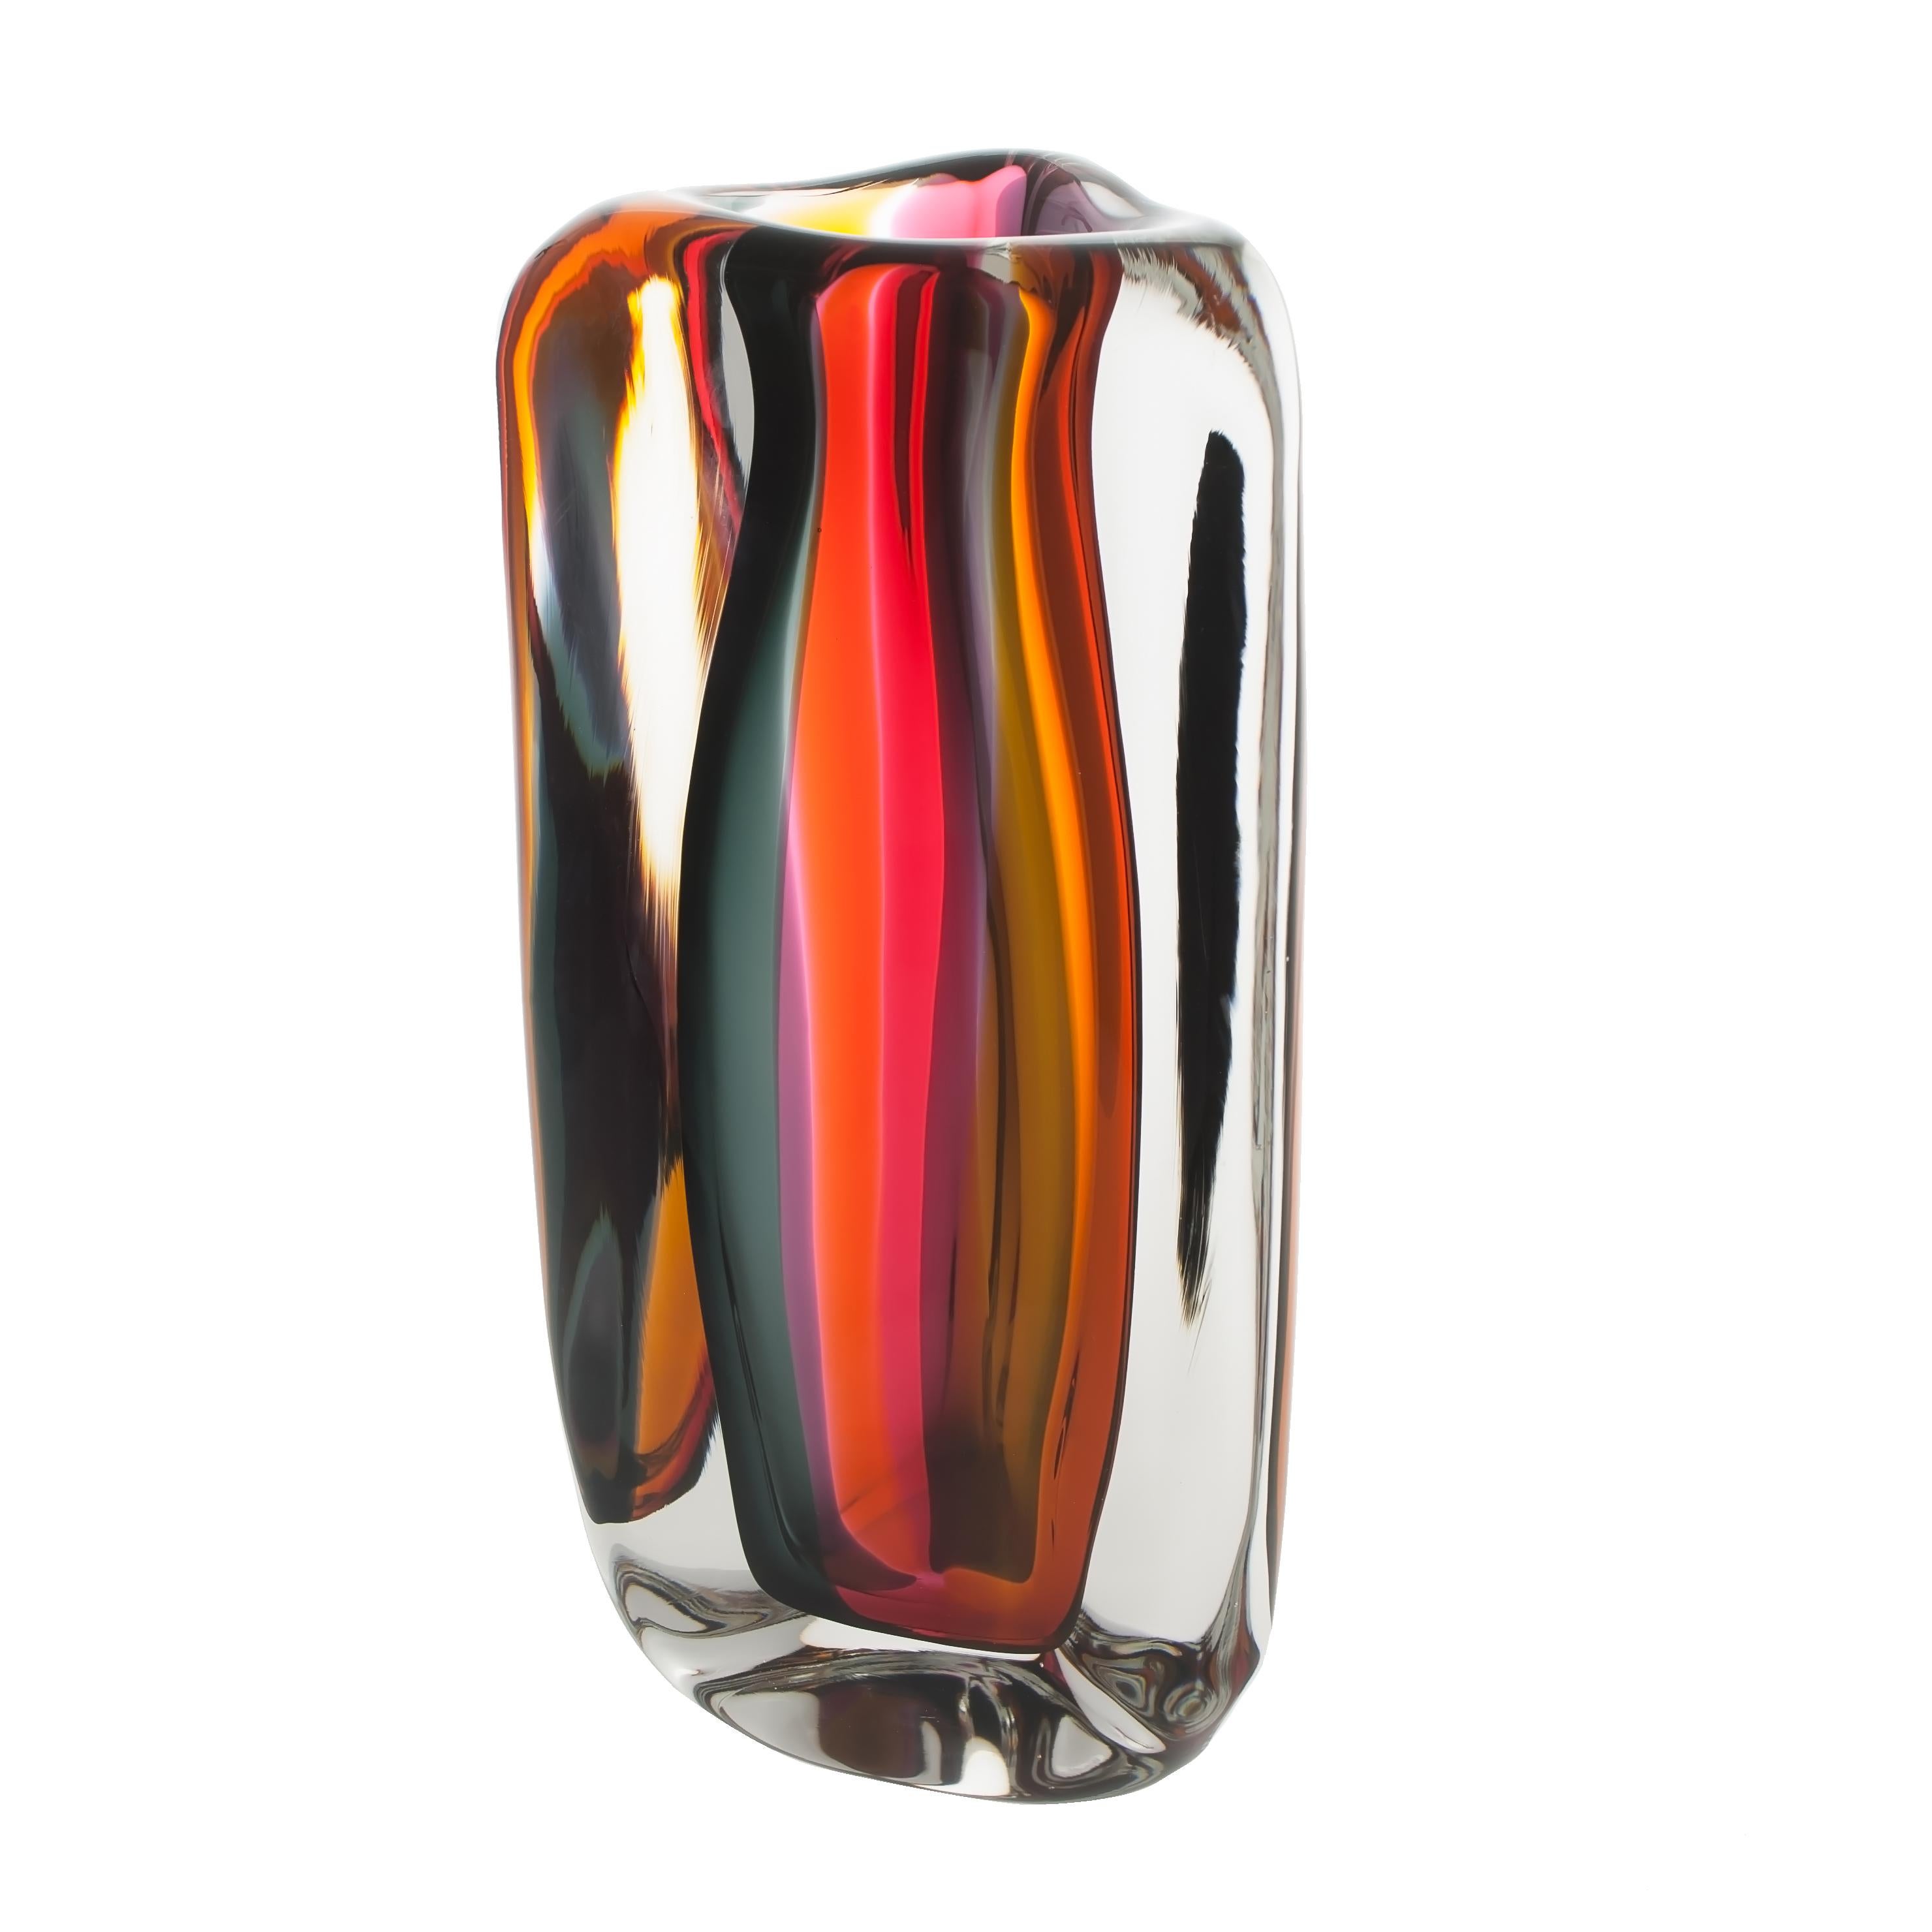 Modern Glass Vase, Sunrise Tall Triangle by Siemon & Salazar - Made to Order